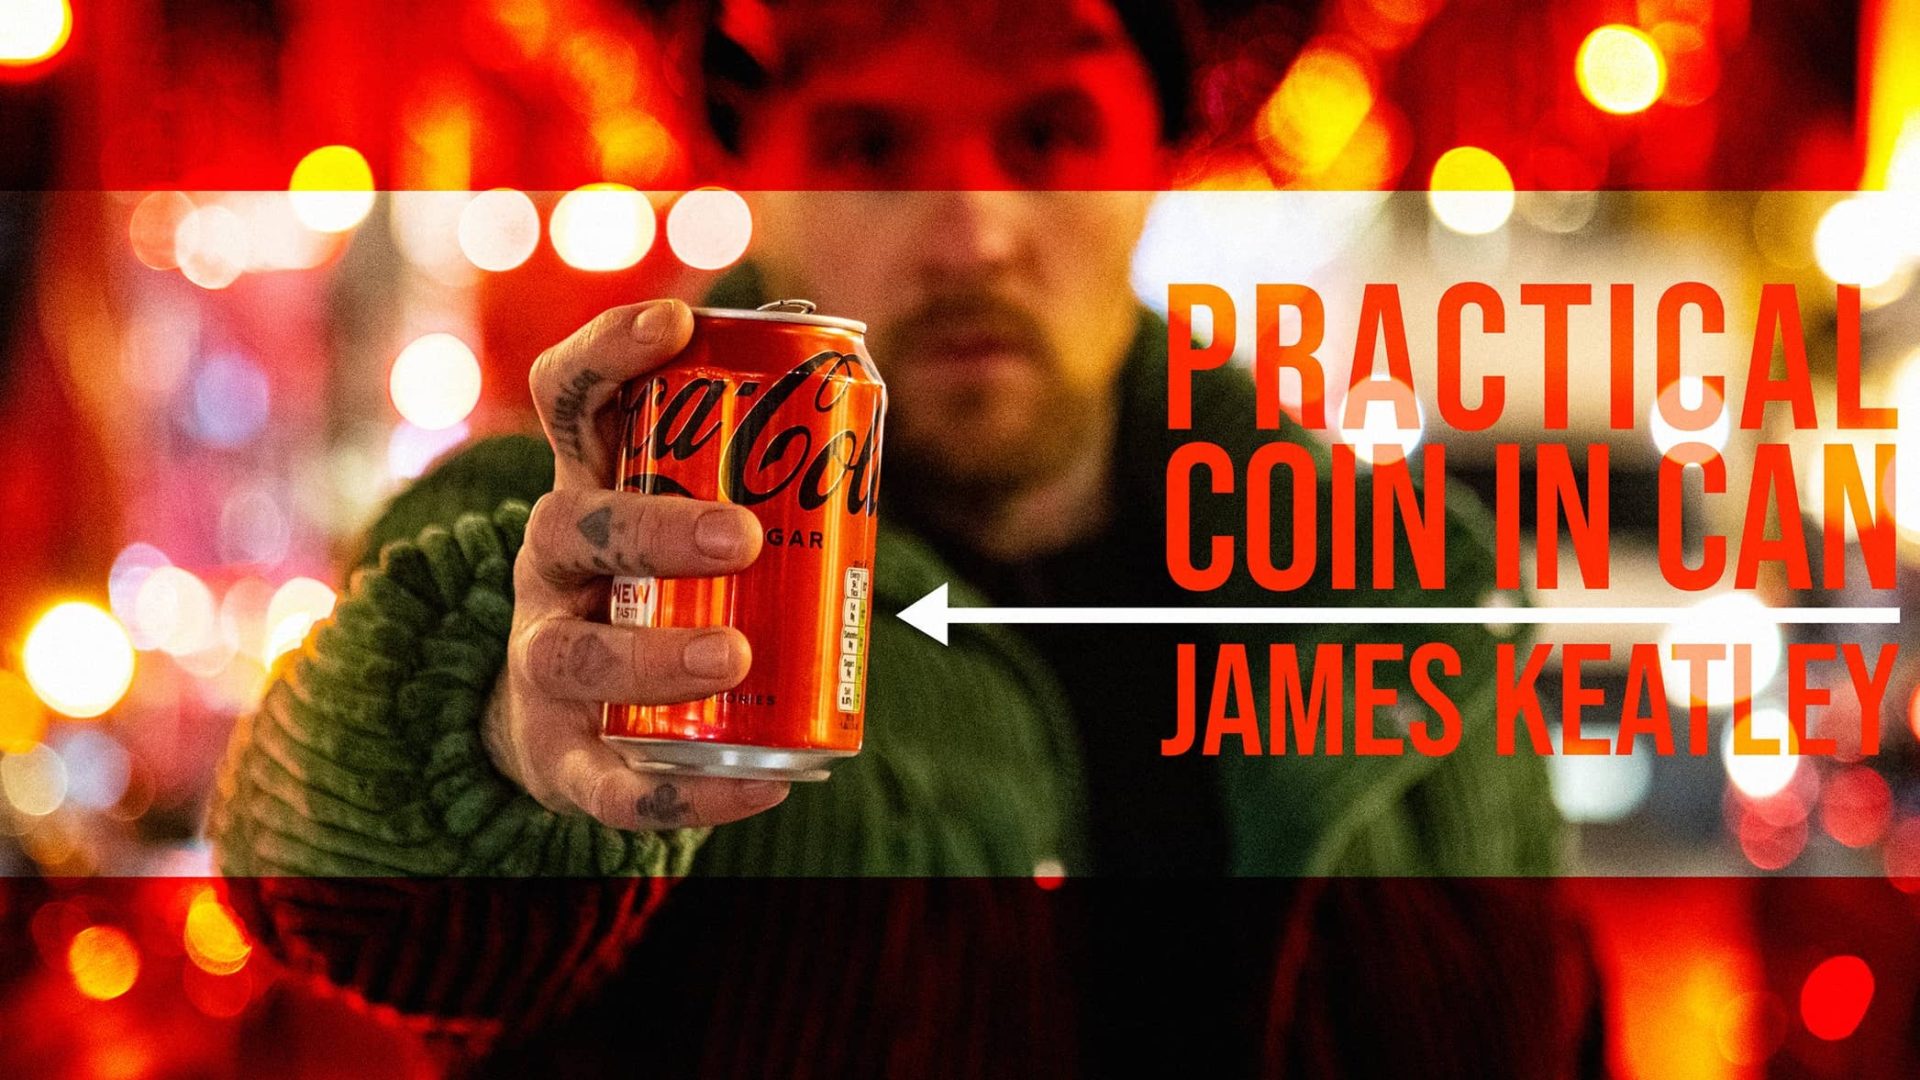 Practical Coin in Can by James Keatley (Video Download)